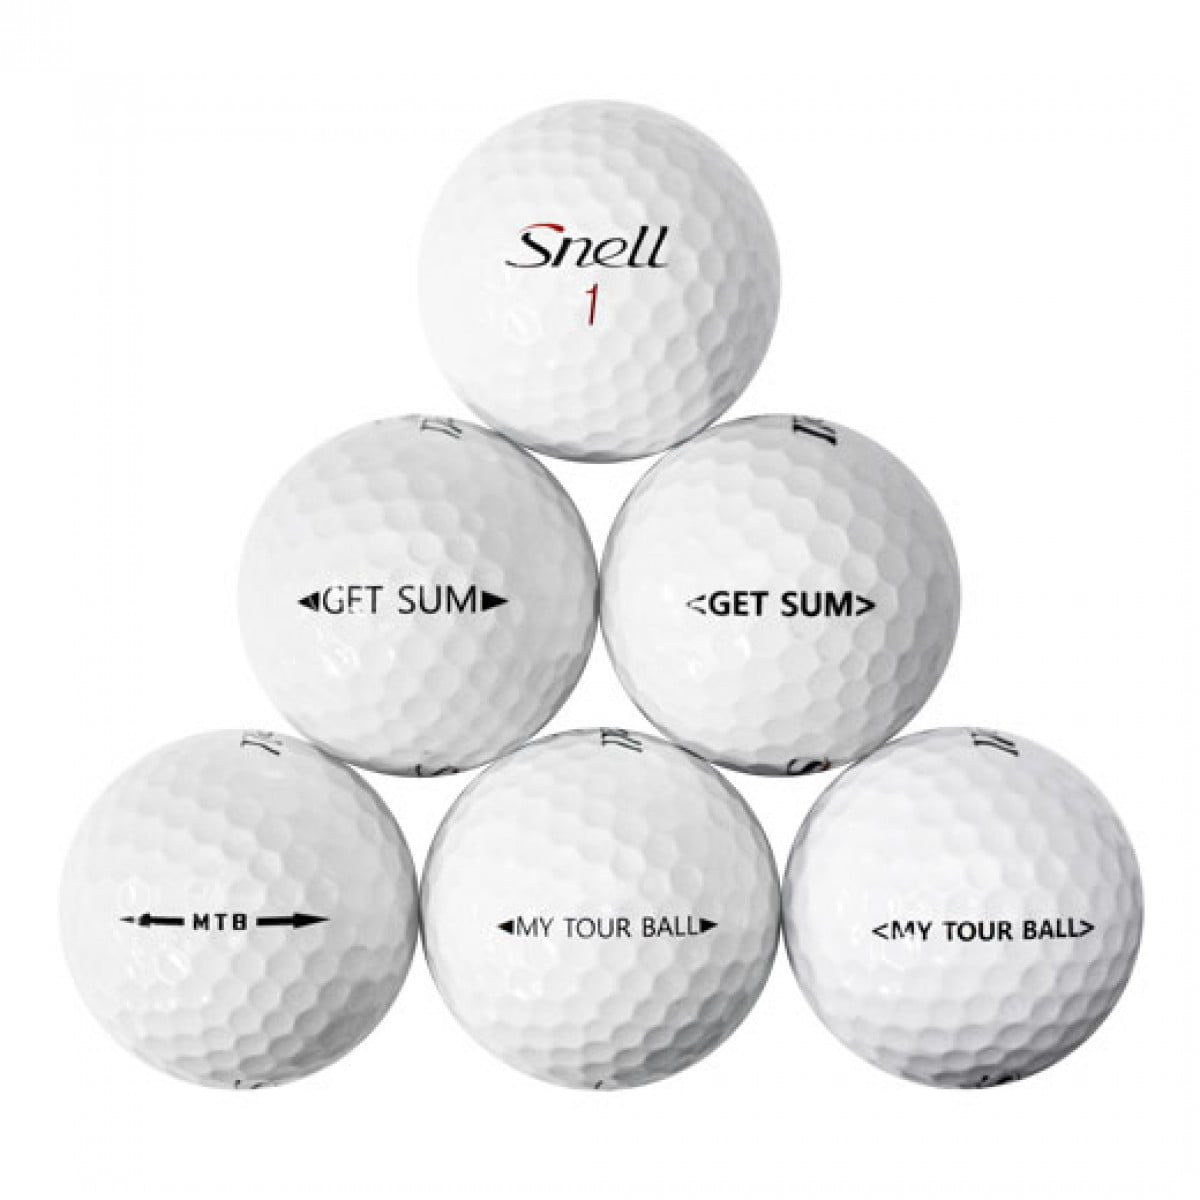 Snell Golf Ball Mix, 100 Good Quality Used Snell Golf Balls (AAA Snell ...